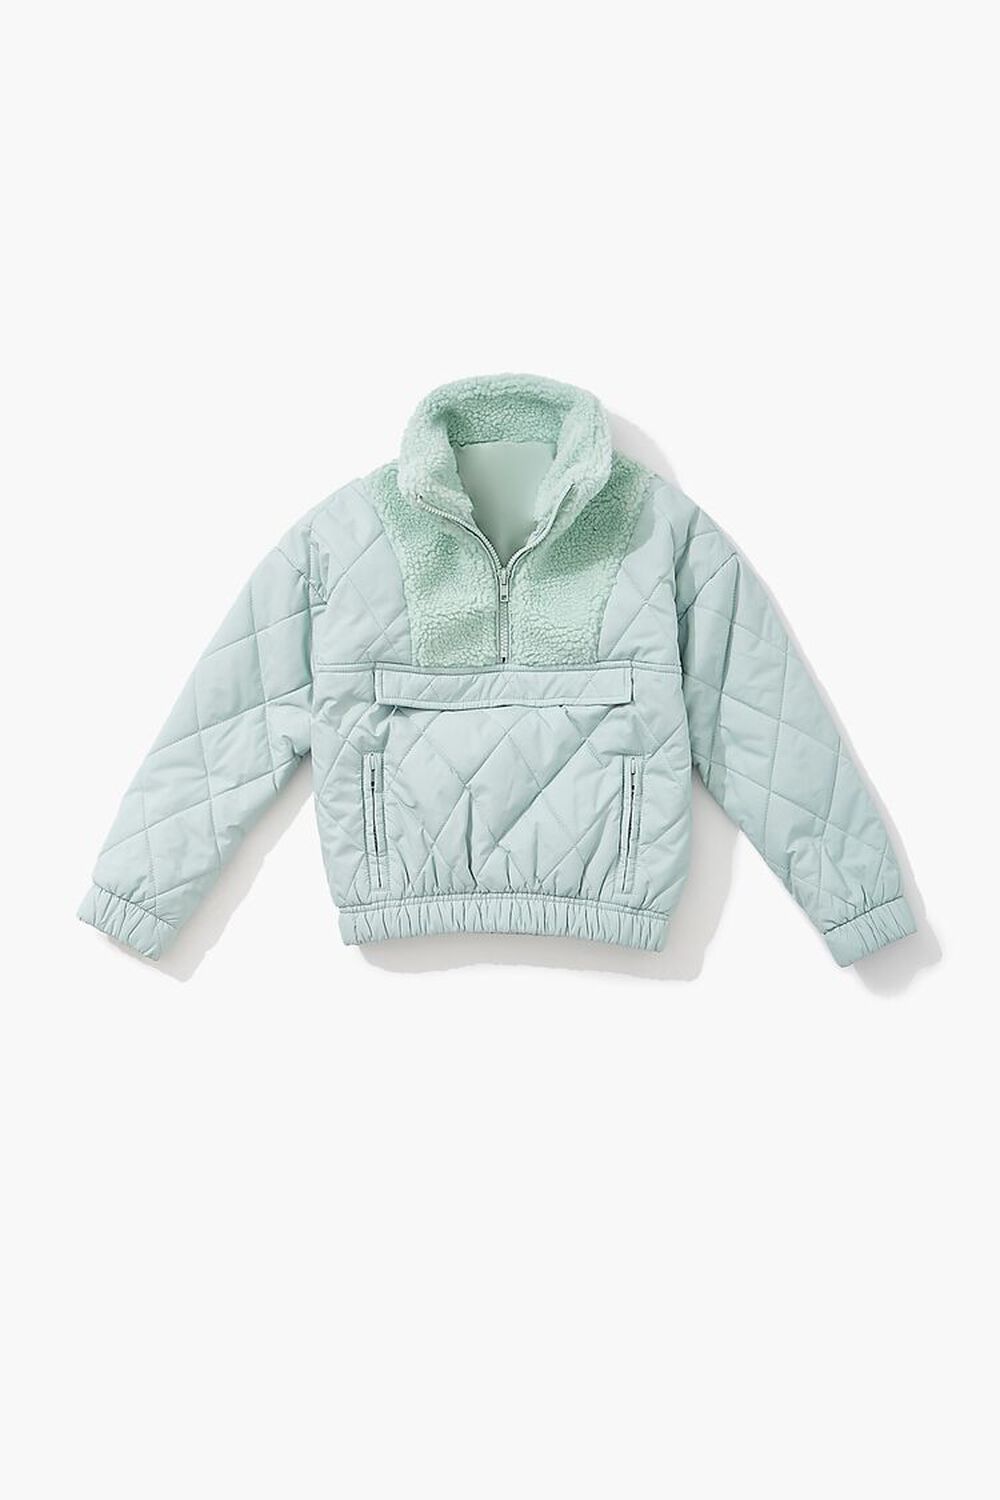 MINT Girls Quilted Faux Shearling Jacket (Kids), image 1